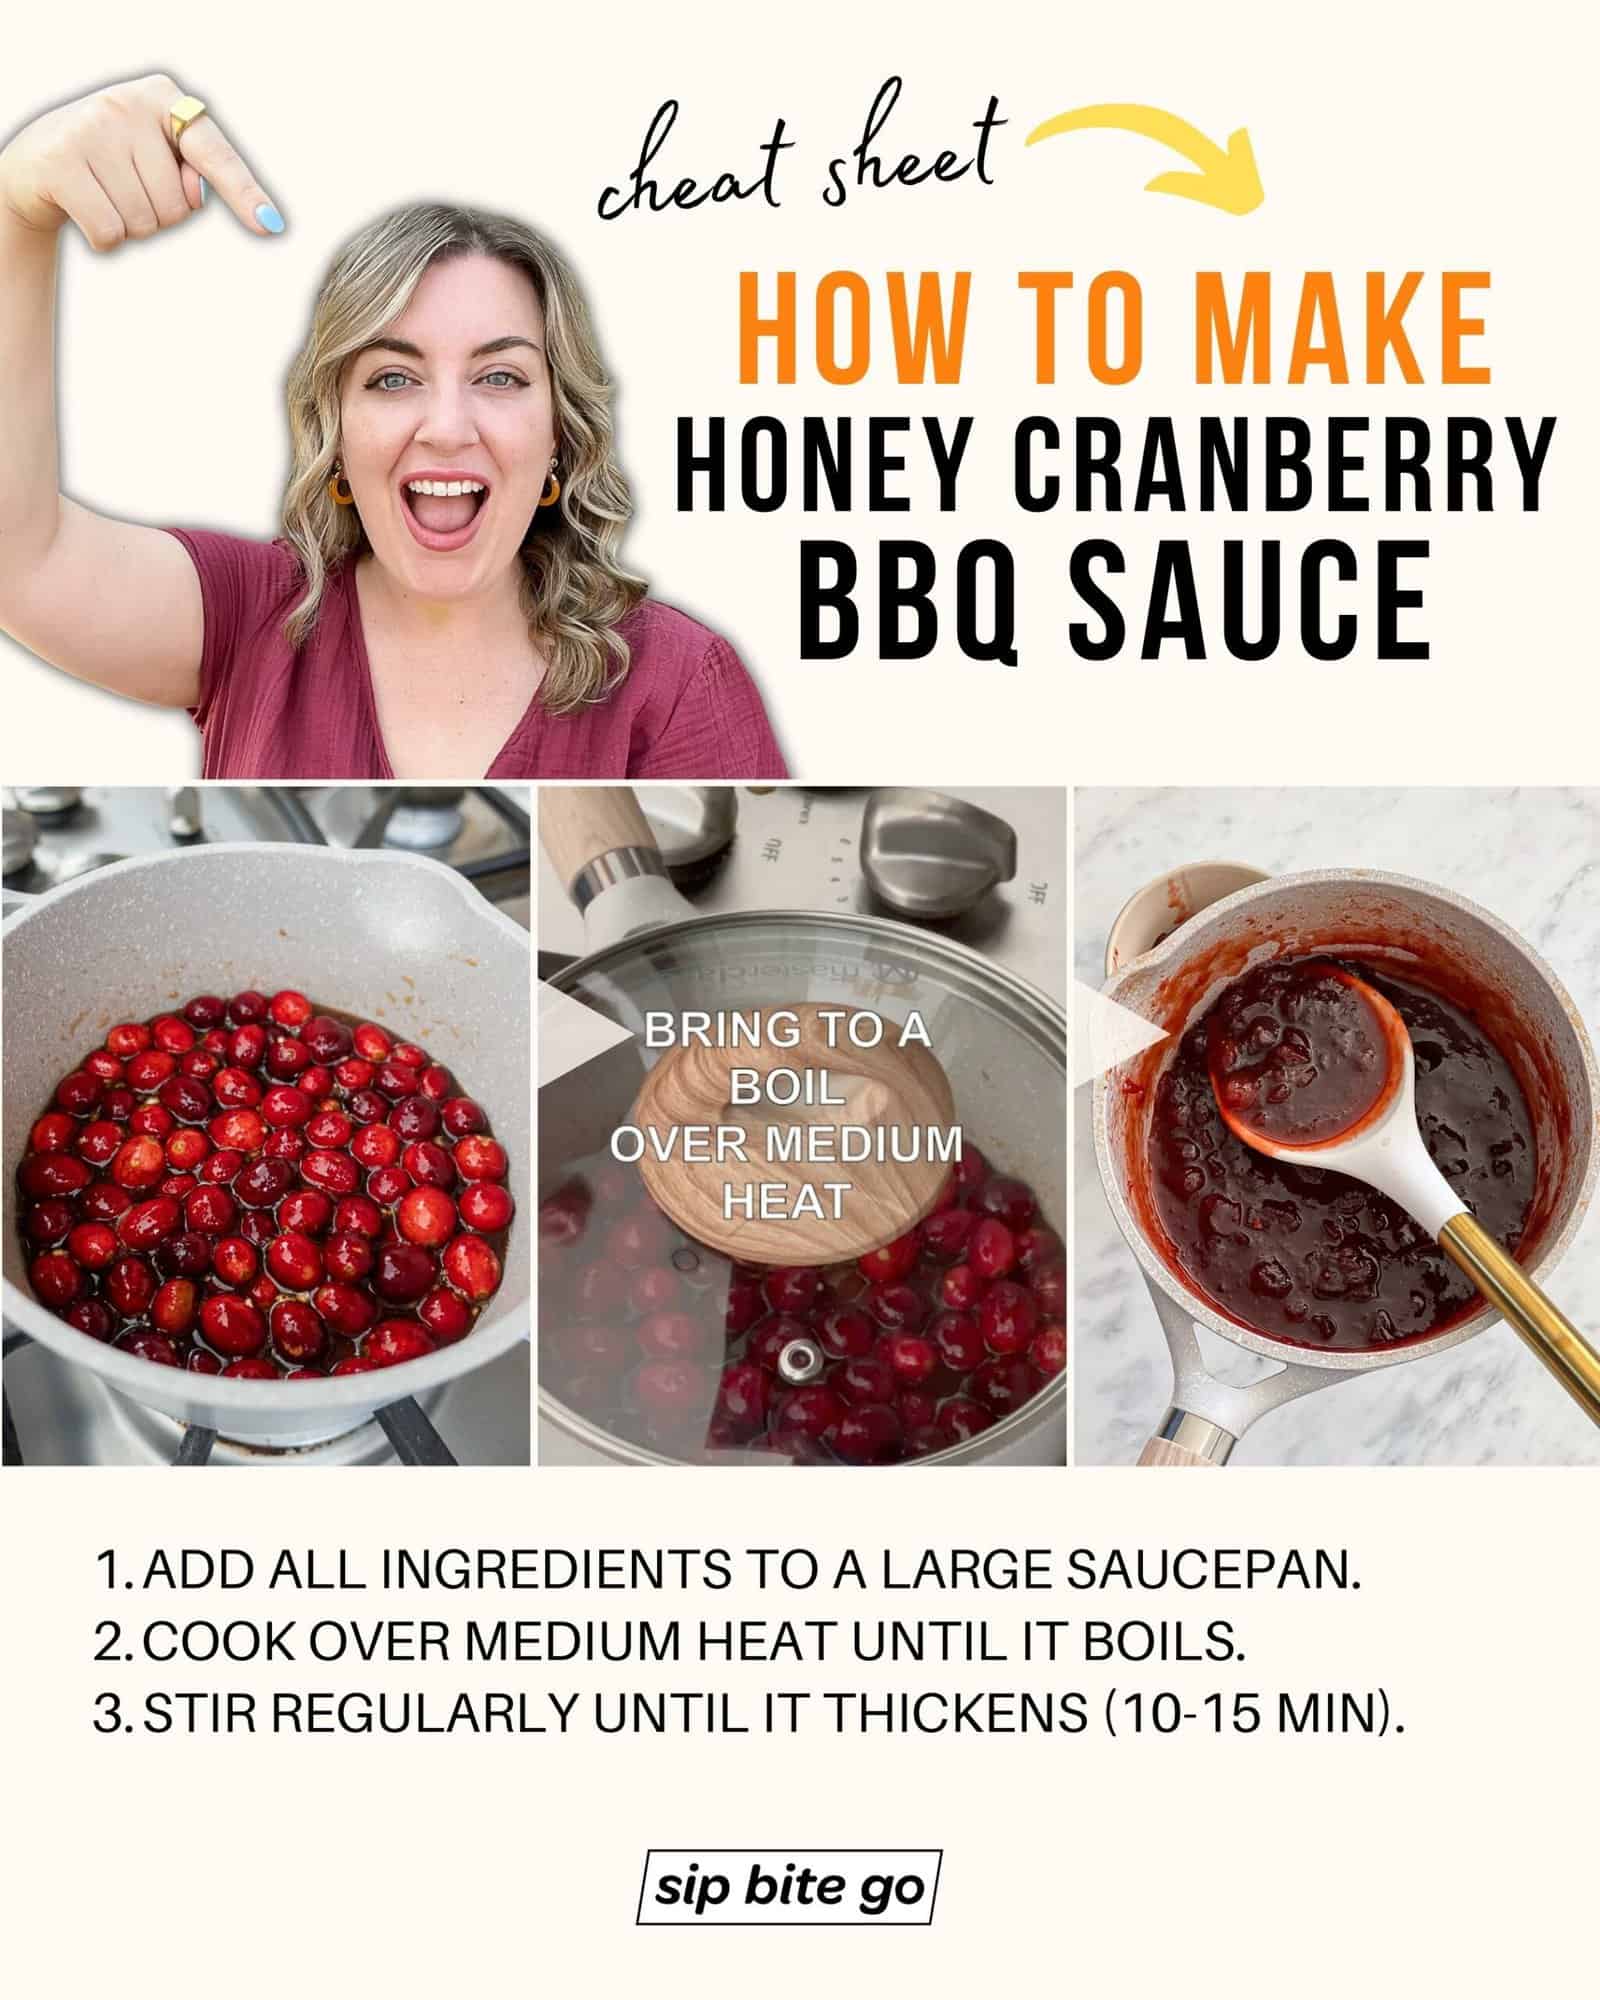 Infographic demonstrating How to make Honey Cranberry BBQ Sauce with Jenna Passaro from Sip Bite Go food blog